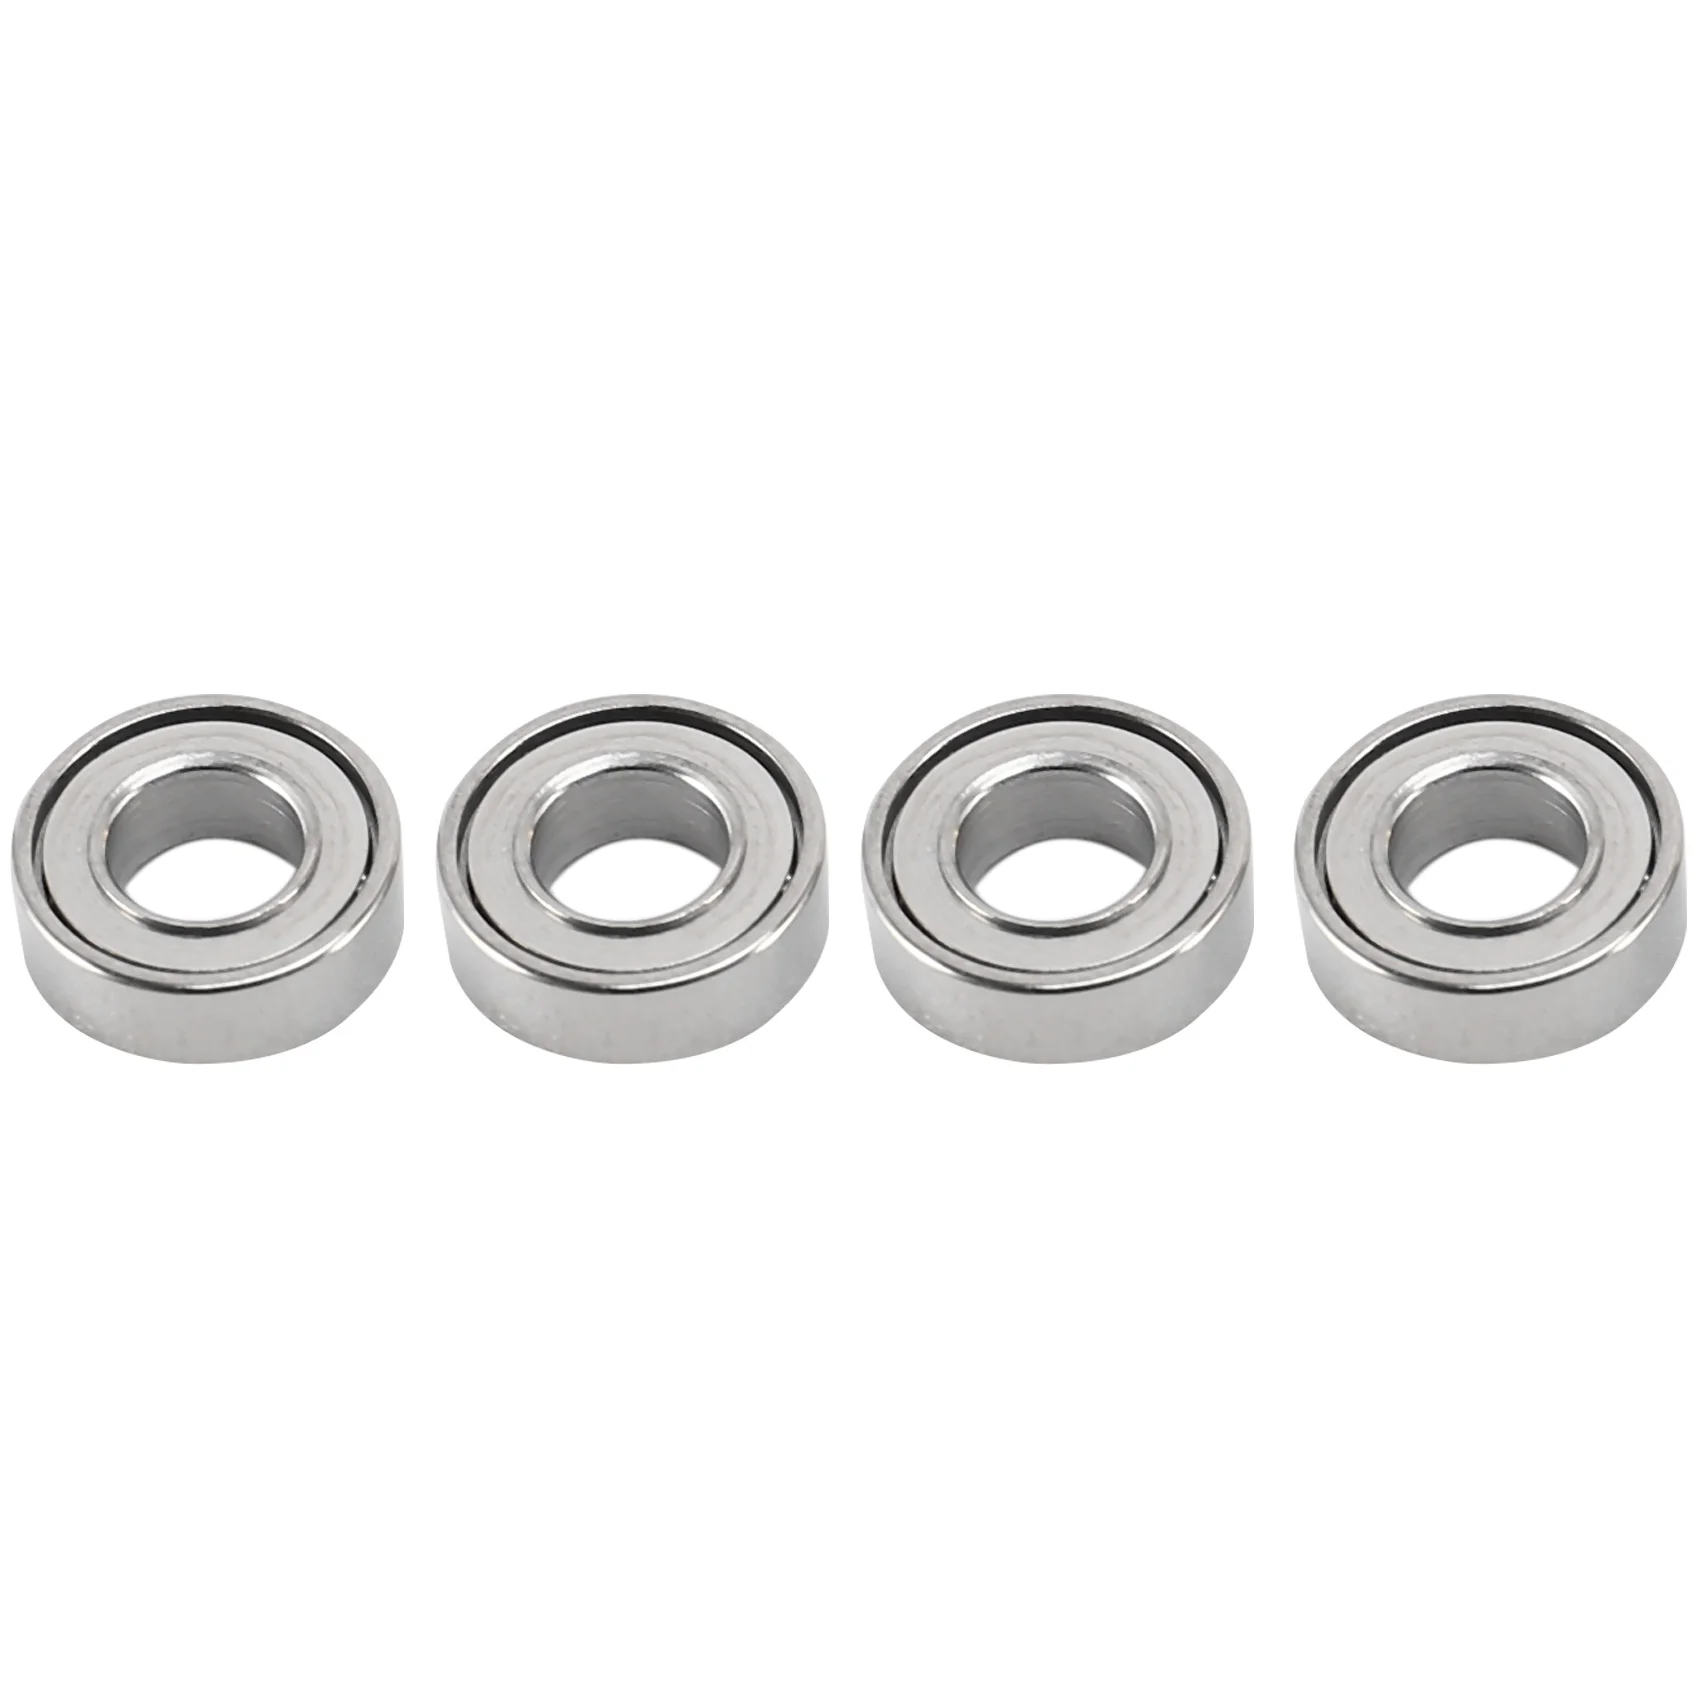 

12PCS Steel Bearing 3X6X2mm for WPL C14 C24 C34 C44 MN D90 MN-90 MN99S RC Car Spare Parts Upgrade Accessories